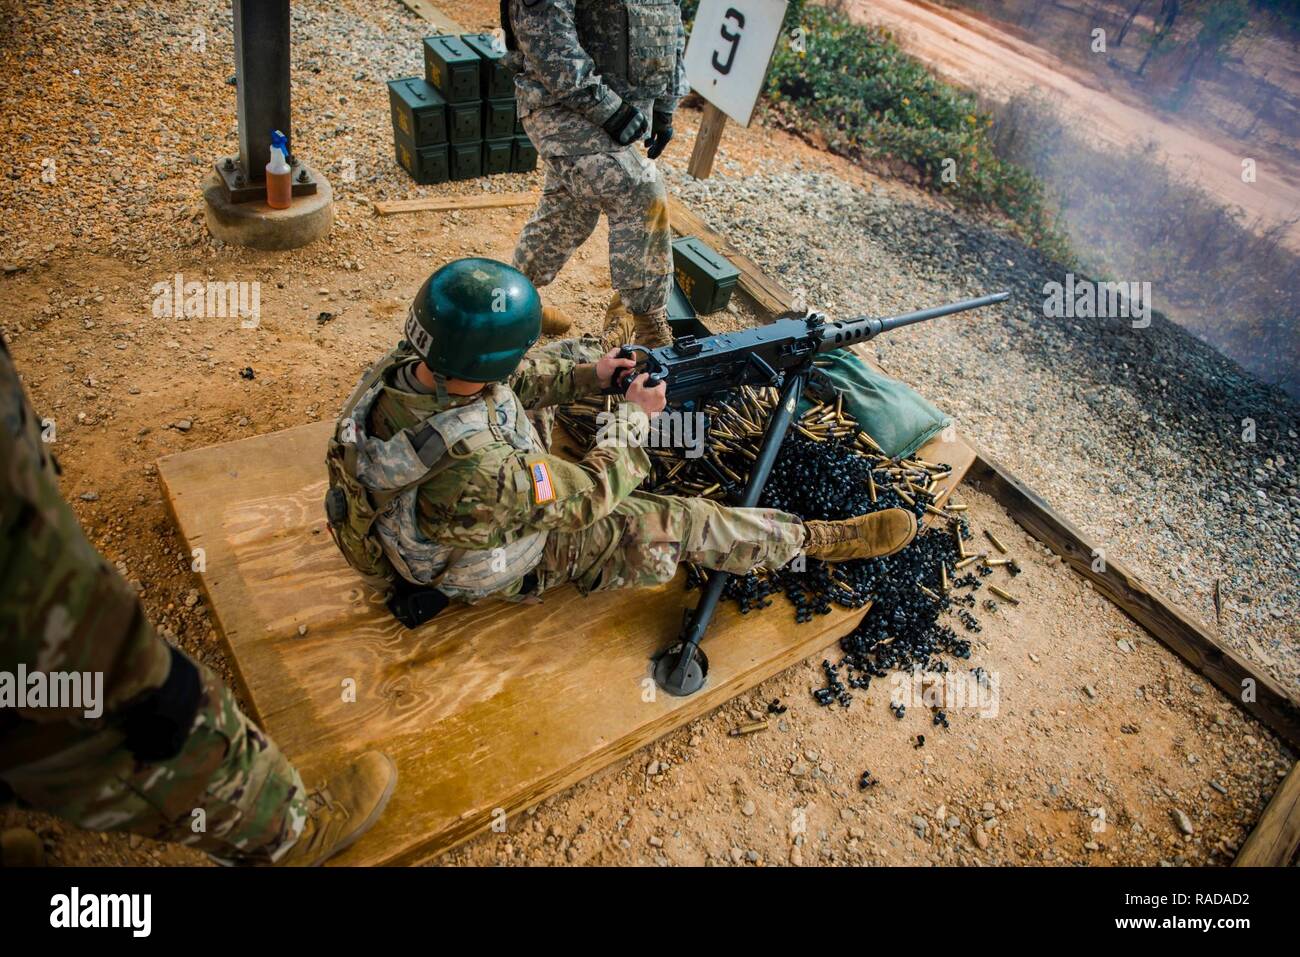 (FORT BENNING, GA) - Spent brass and ammo links pile up under the M2 as rounds are expended. Several different types of ammunition have been used in the M2 to include standard ball, armor-piercing, armor-piercing incendiary, and armor-piercing incendiary tracer rounds. Stock Photo